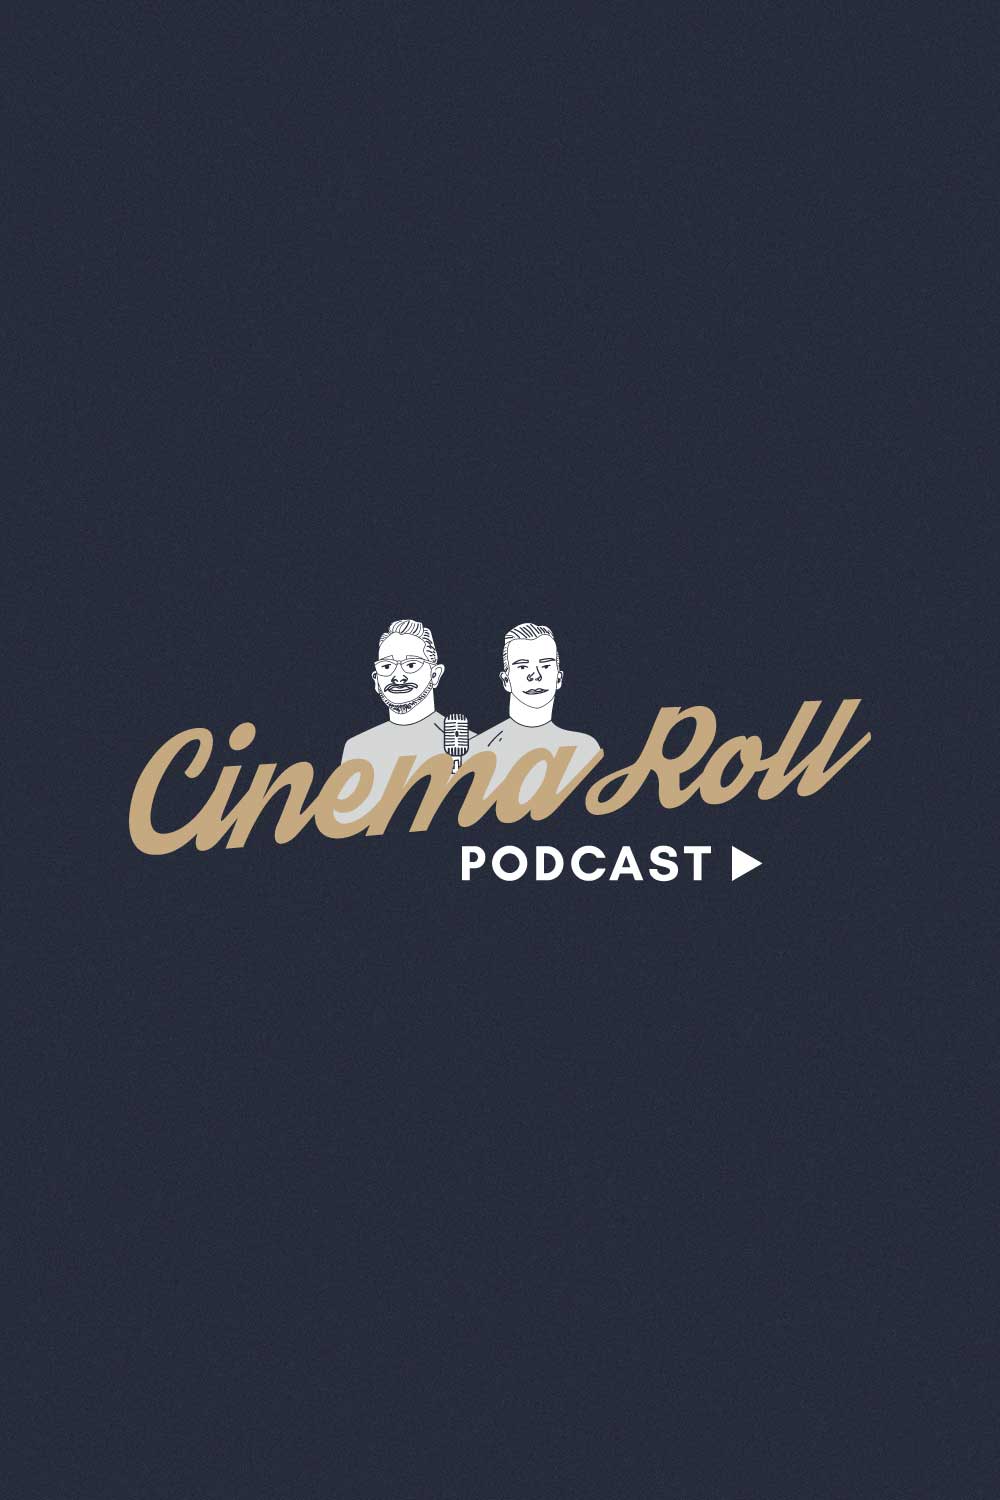 Primary logo for the Cinema Roll podcast by Victoria & Co.